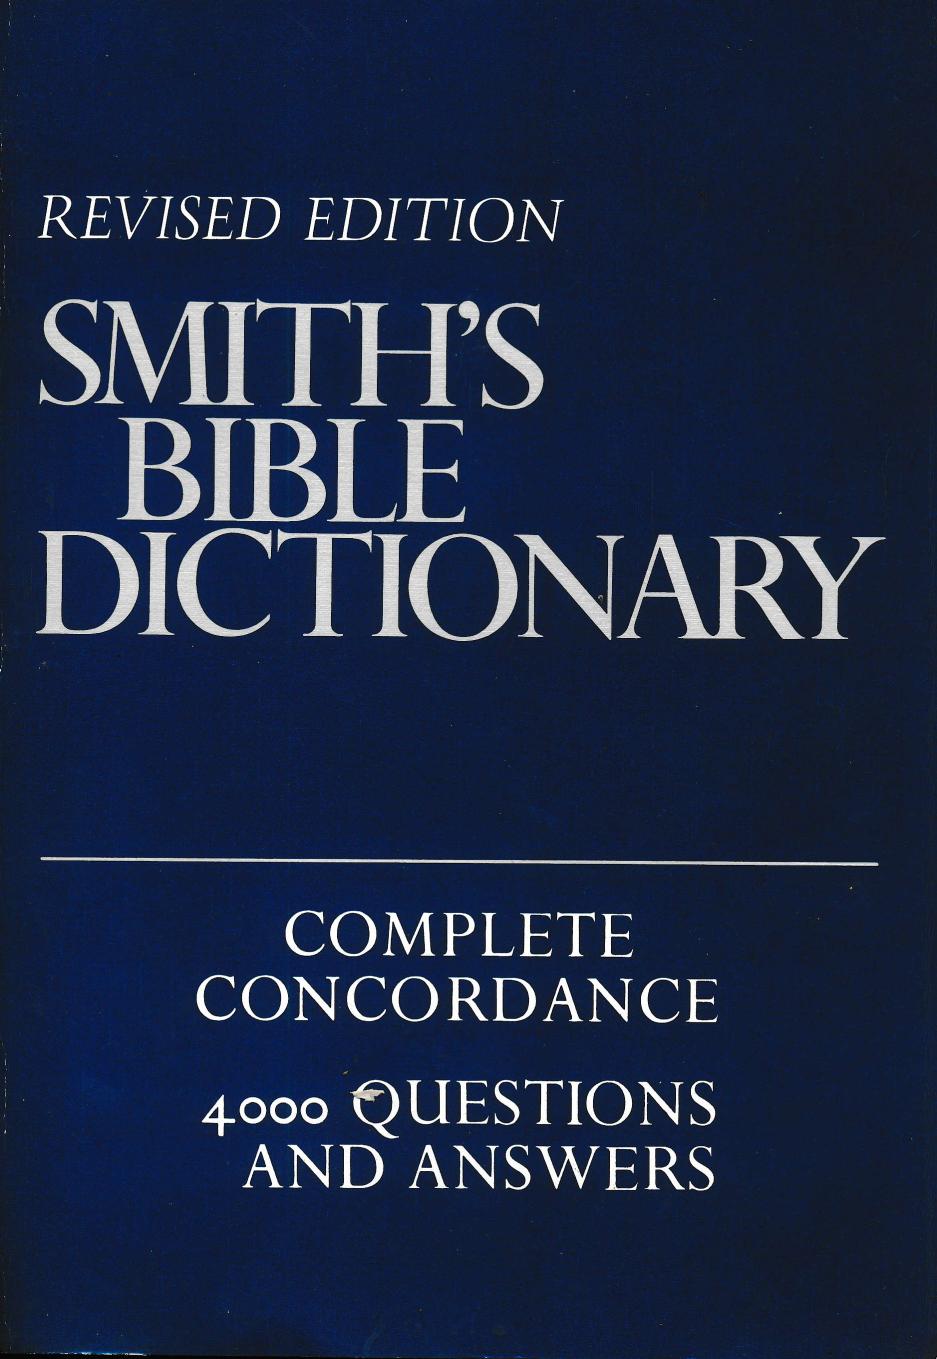 Smith's Bible Dictionary: More Than 6,000 Detailed Definitions, Articles, and Illustrations